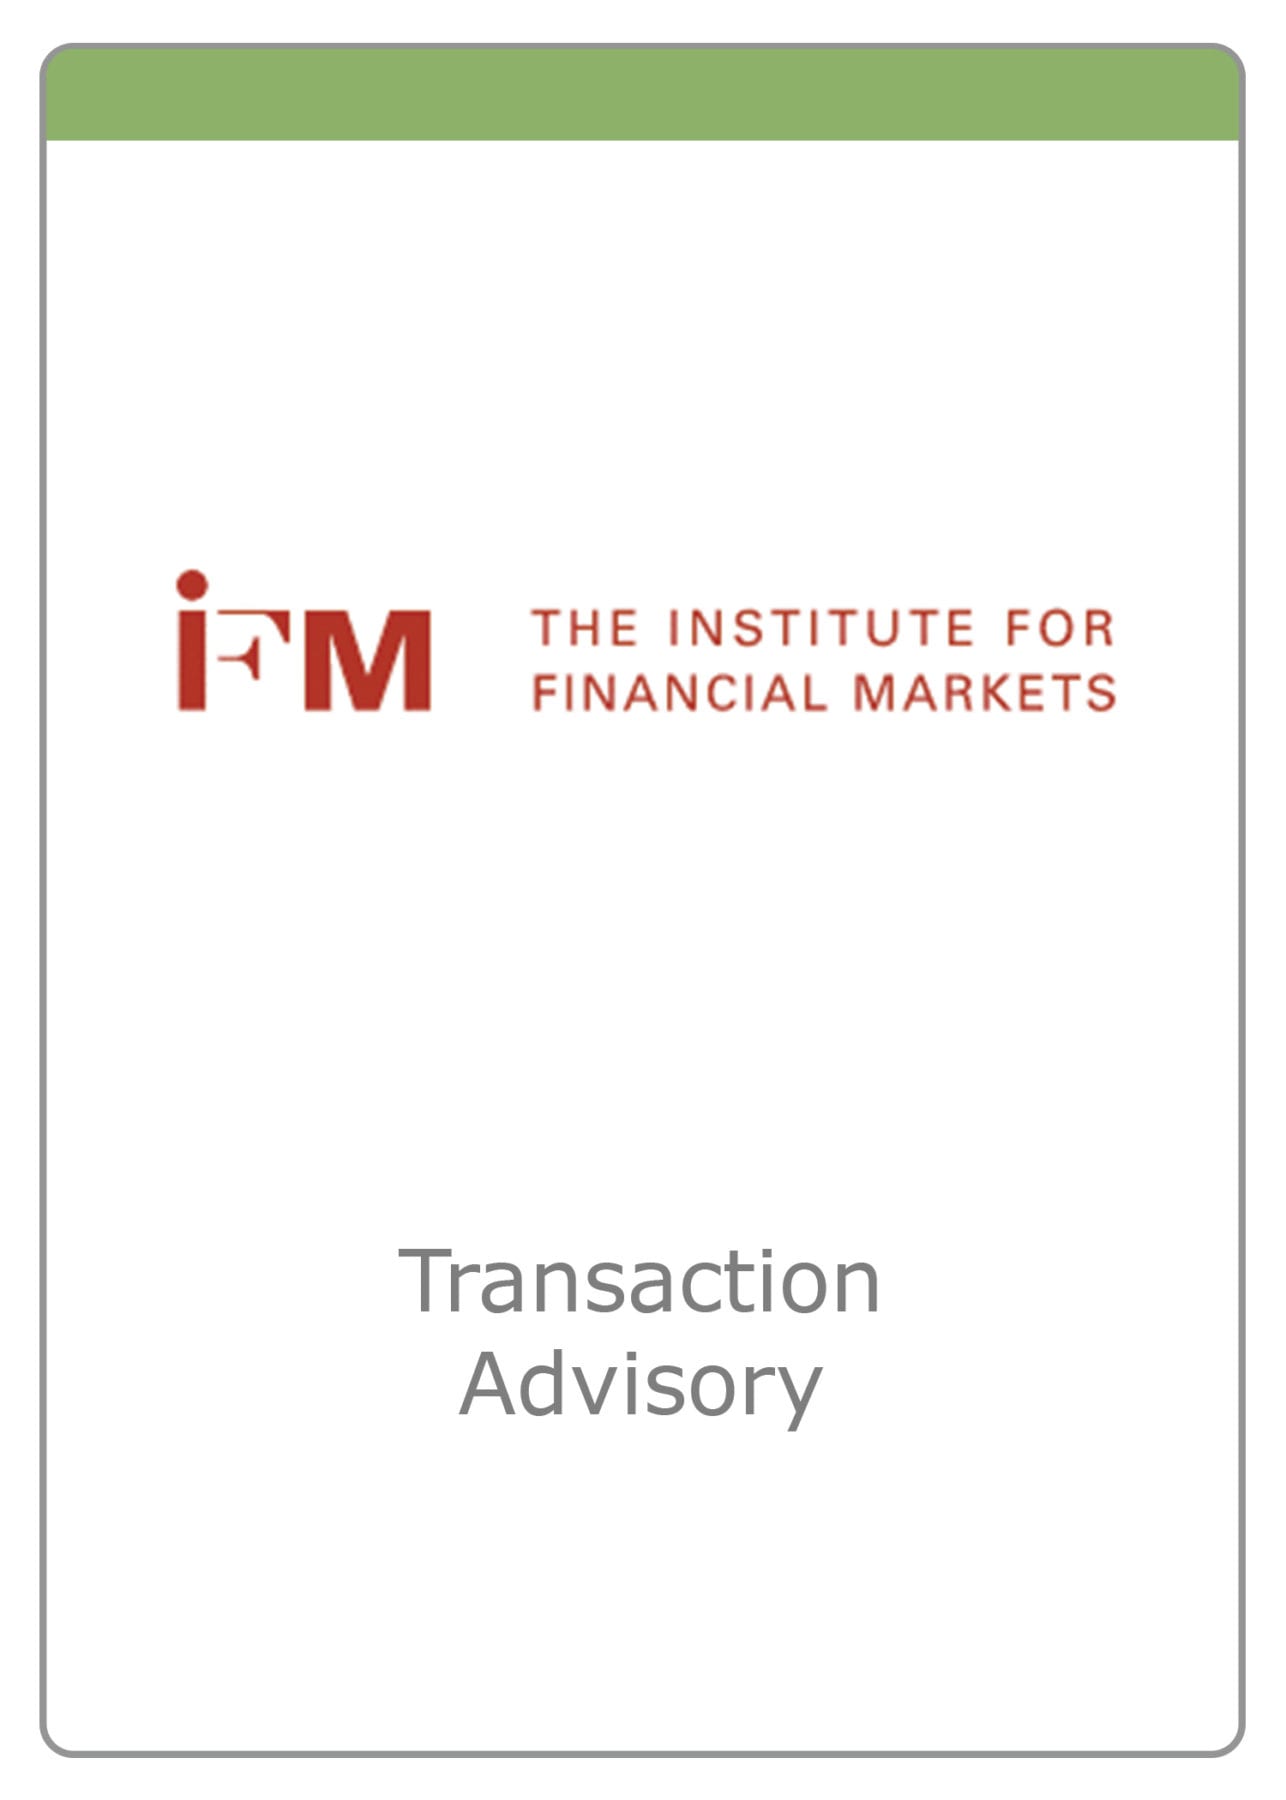 Institute for Financial Markets - Transaction Advisory - The McLean Group